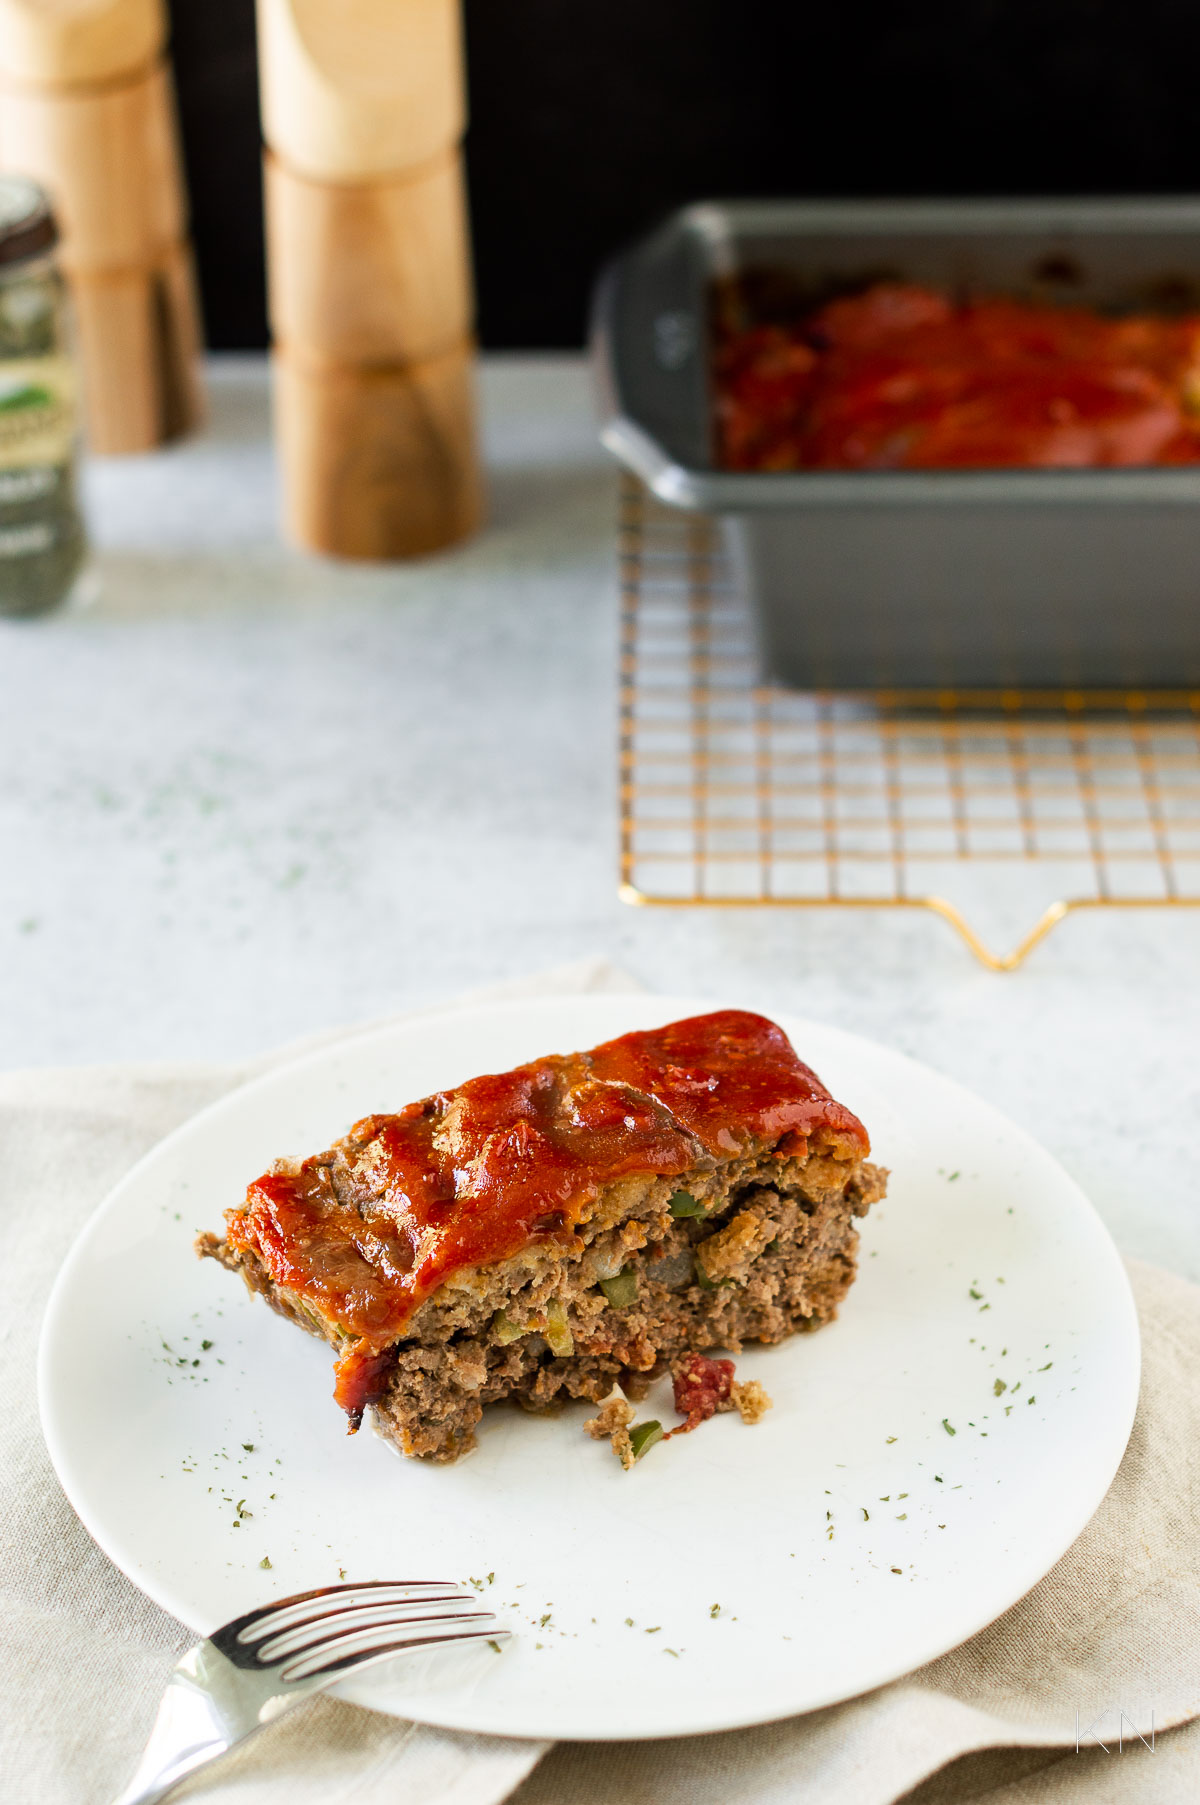 Delicious Family Dinner Idea: Savory Meatloaf